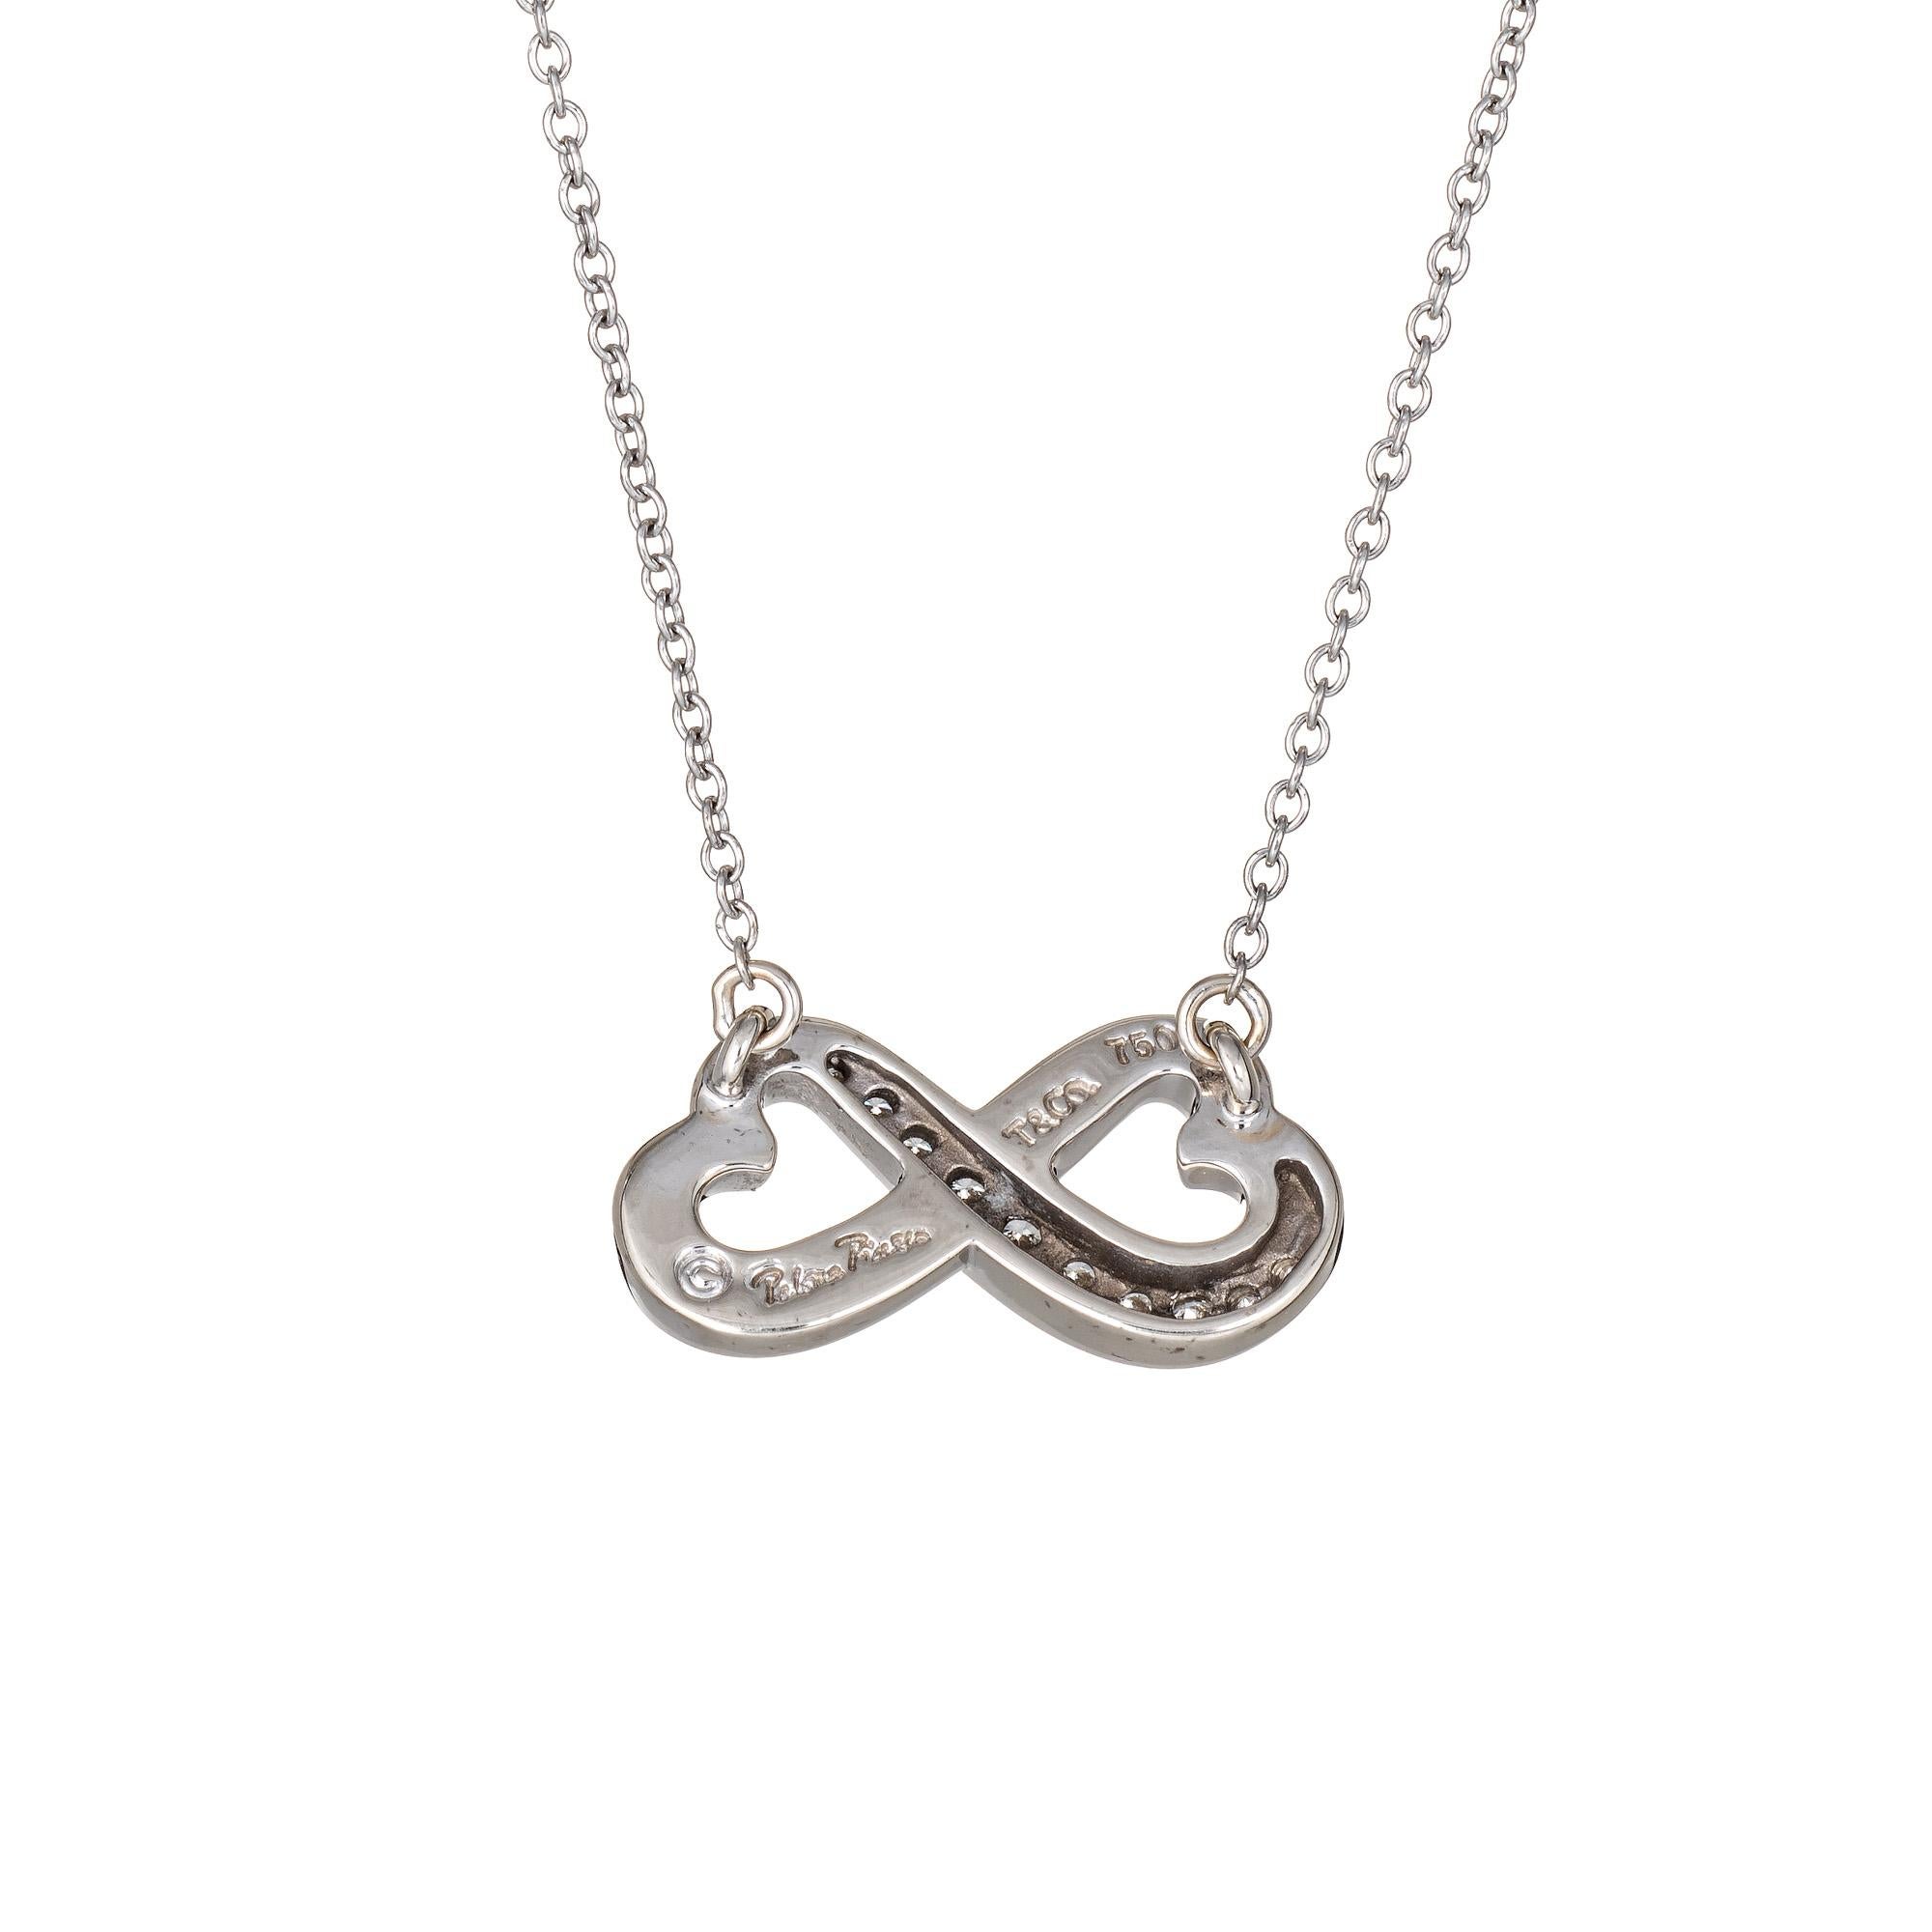 Elegant and finely detailed pre owned Tiffany & Co double heart diamond necklace crafted in 18 karat white gold.  

10 diamonds total an estimated 0.10 carats (estimated at F-G color and VVS2 clarity).

The double heart pendant is attached to a 16